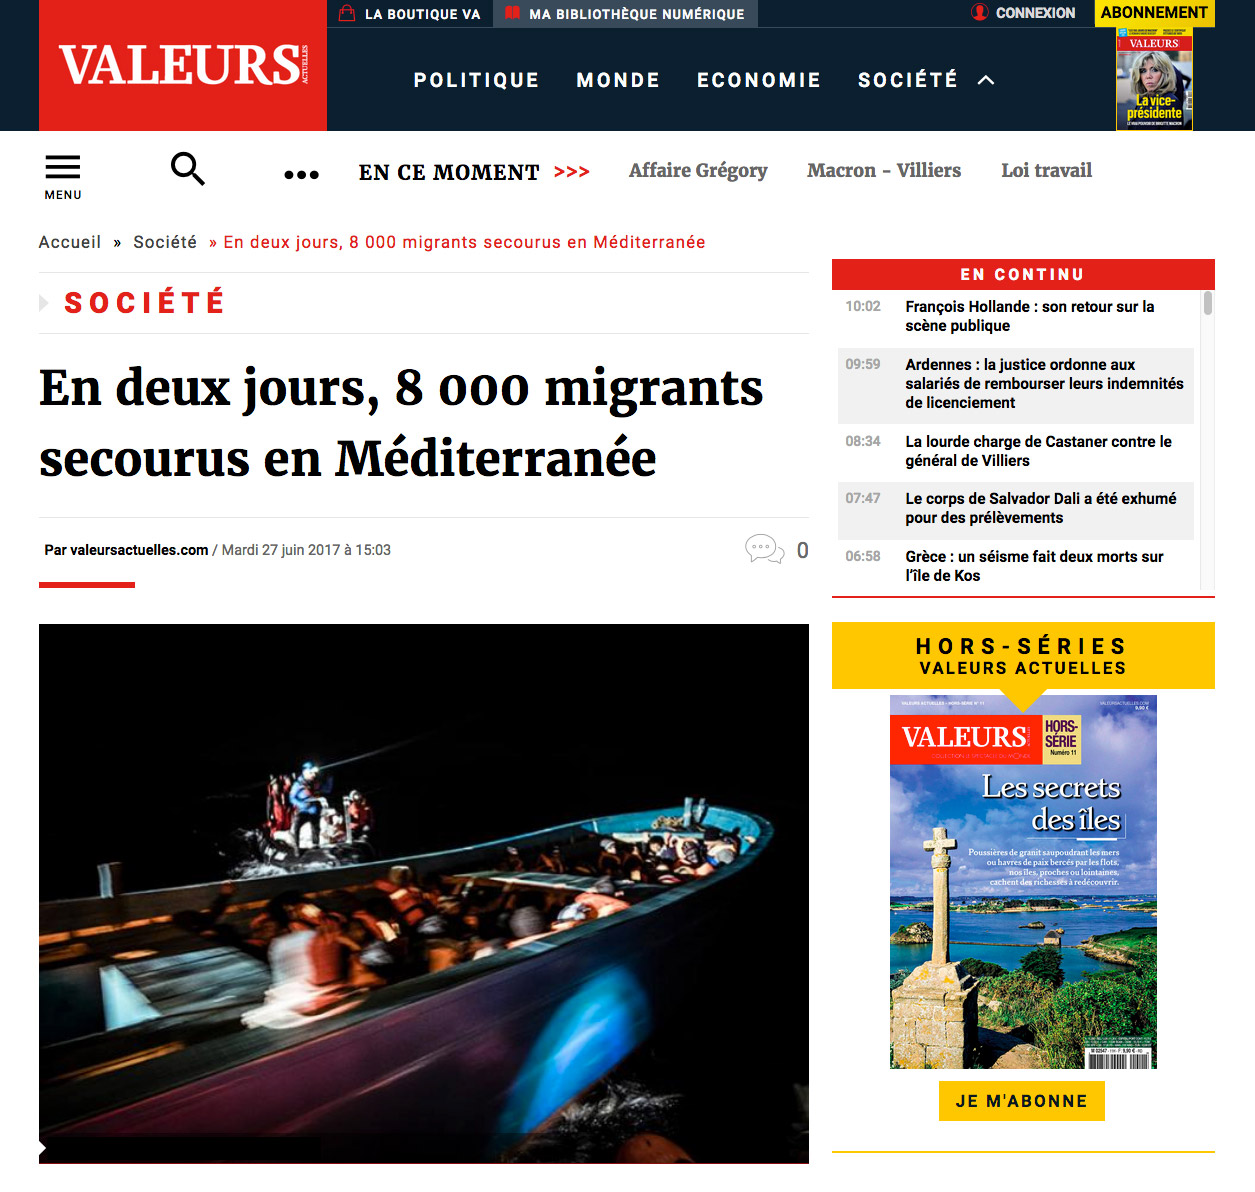 Marco Panzetti's photographs publication in Valeurs